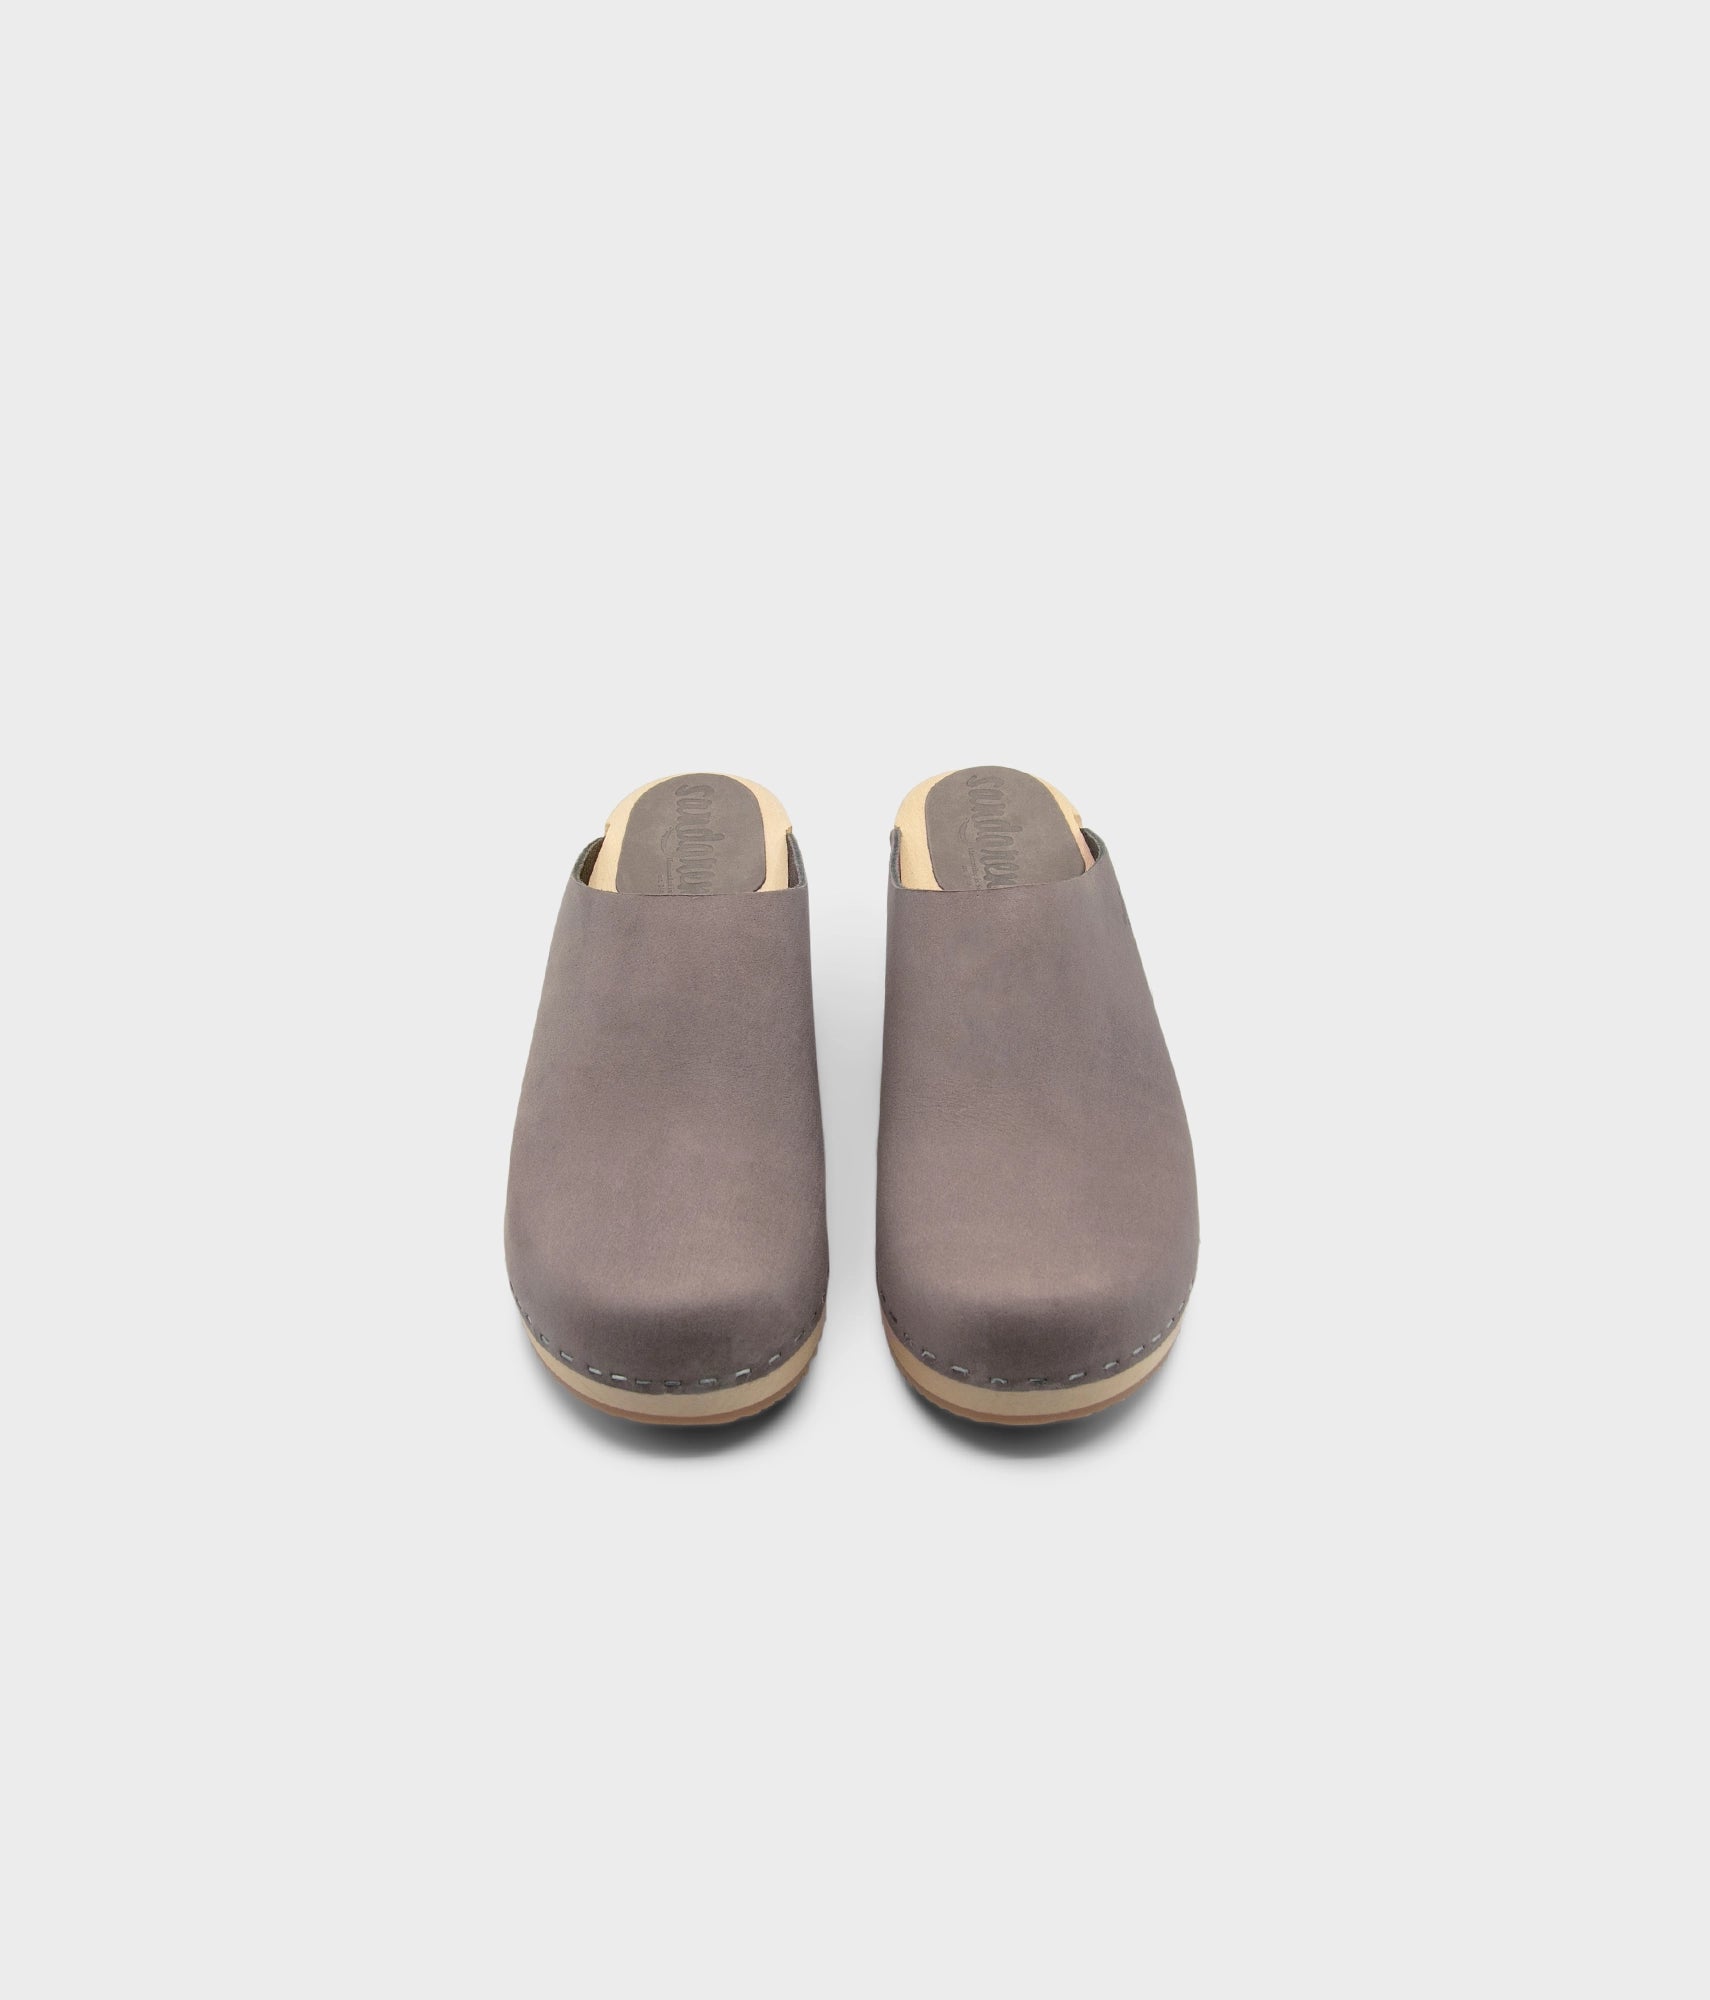 low heeled minimalistic clog mules in stone grey nubuck leather stapled on a light wooden base